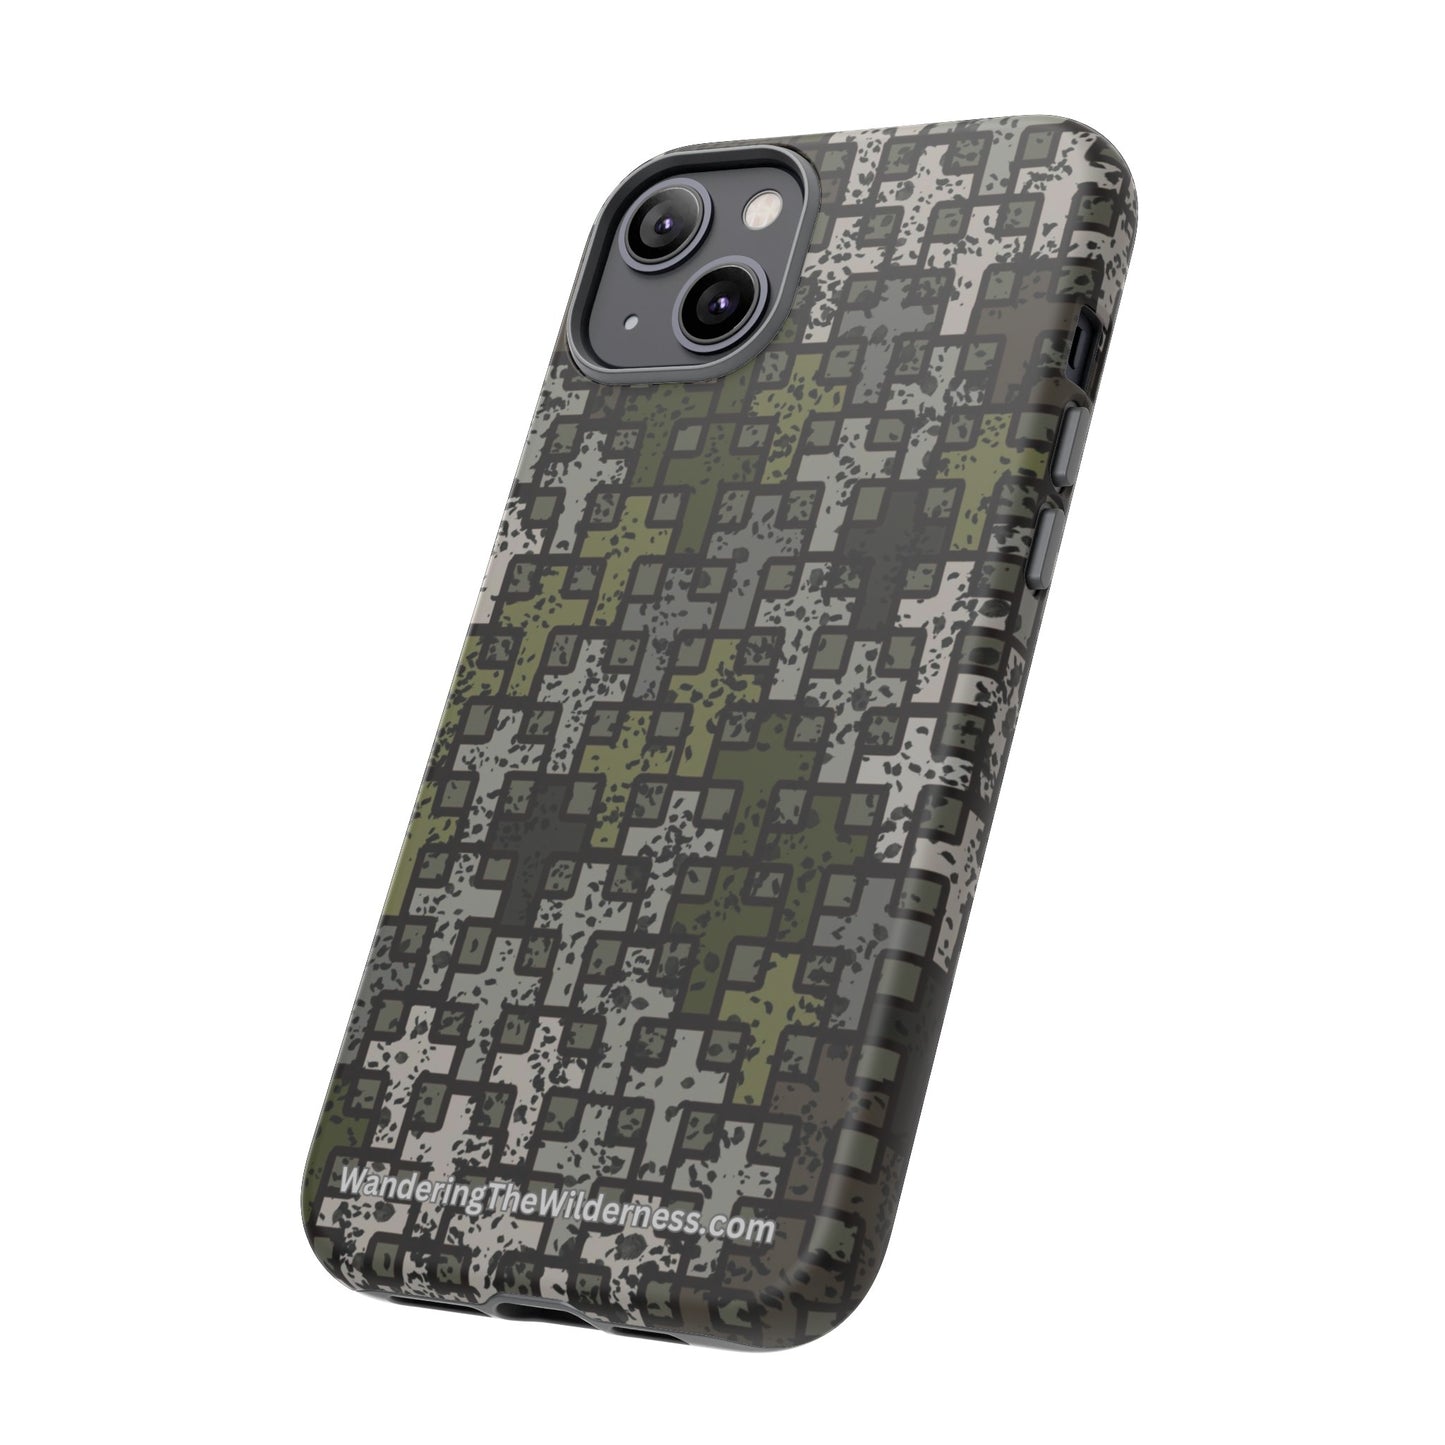 Wandering the Wilderness Rockslide Camo Tough Cases